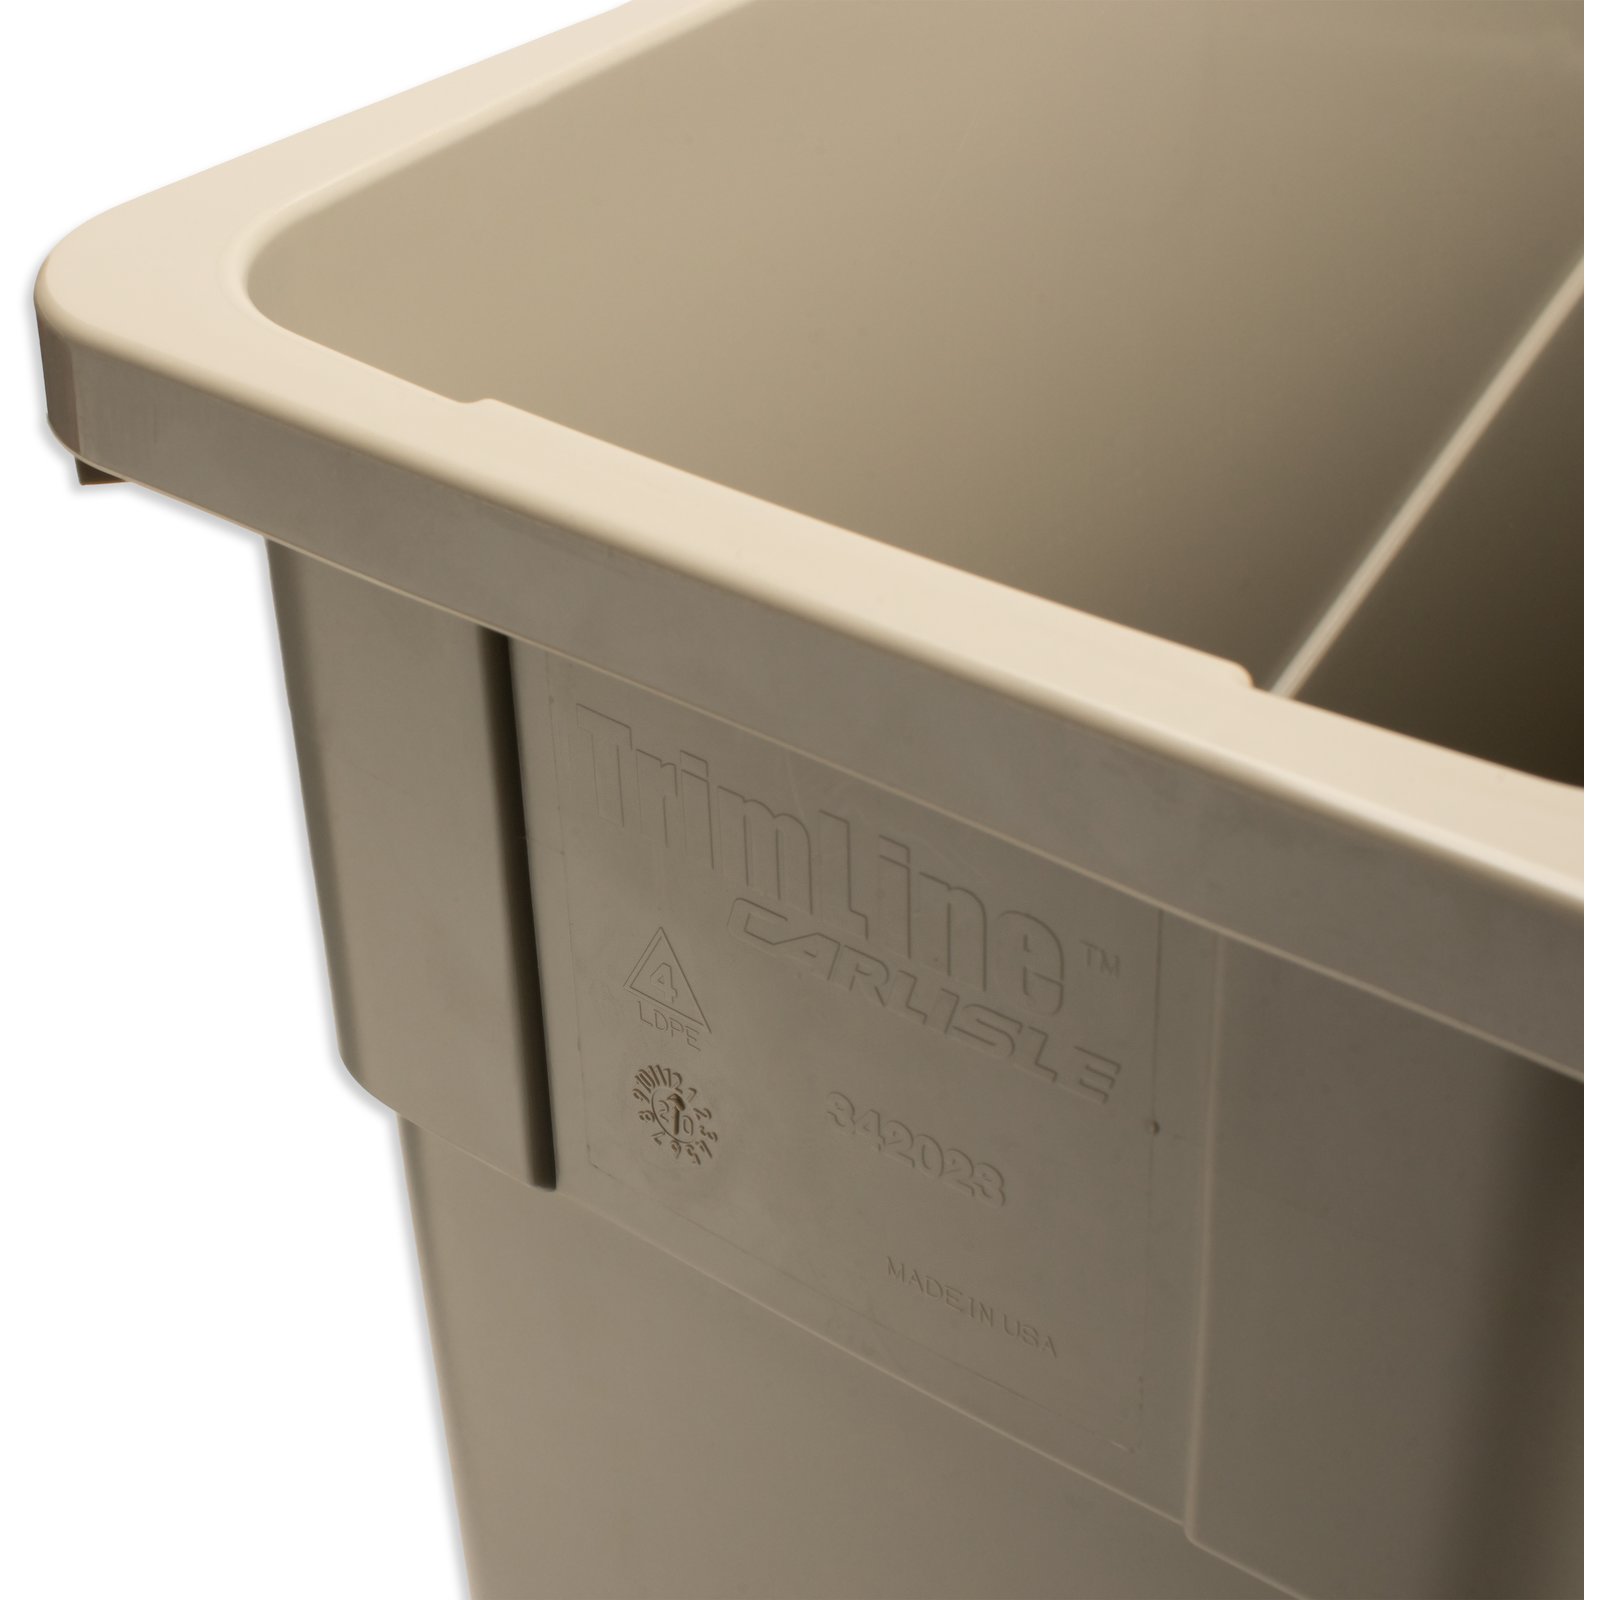 Carlisle 34201523 Trimline Rectangle Waste Container Trash Can, 15 Gallon, Gray